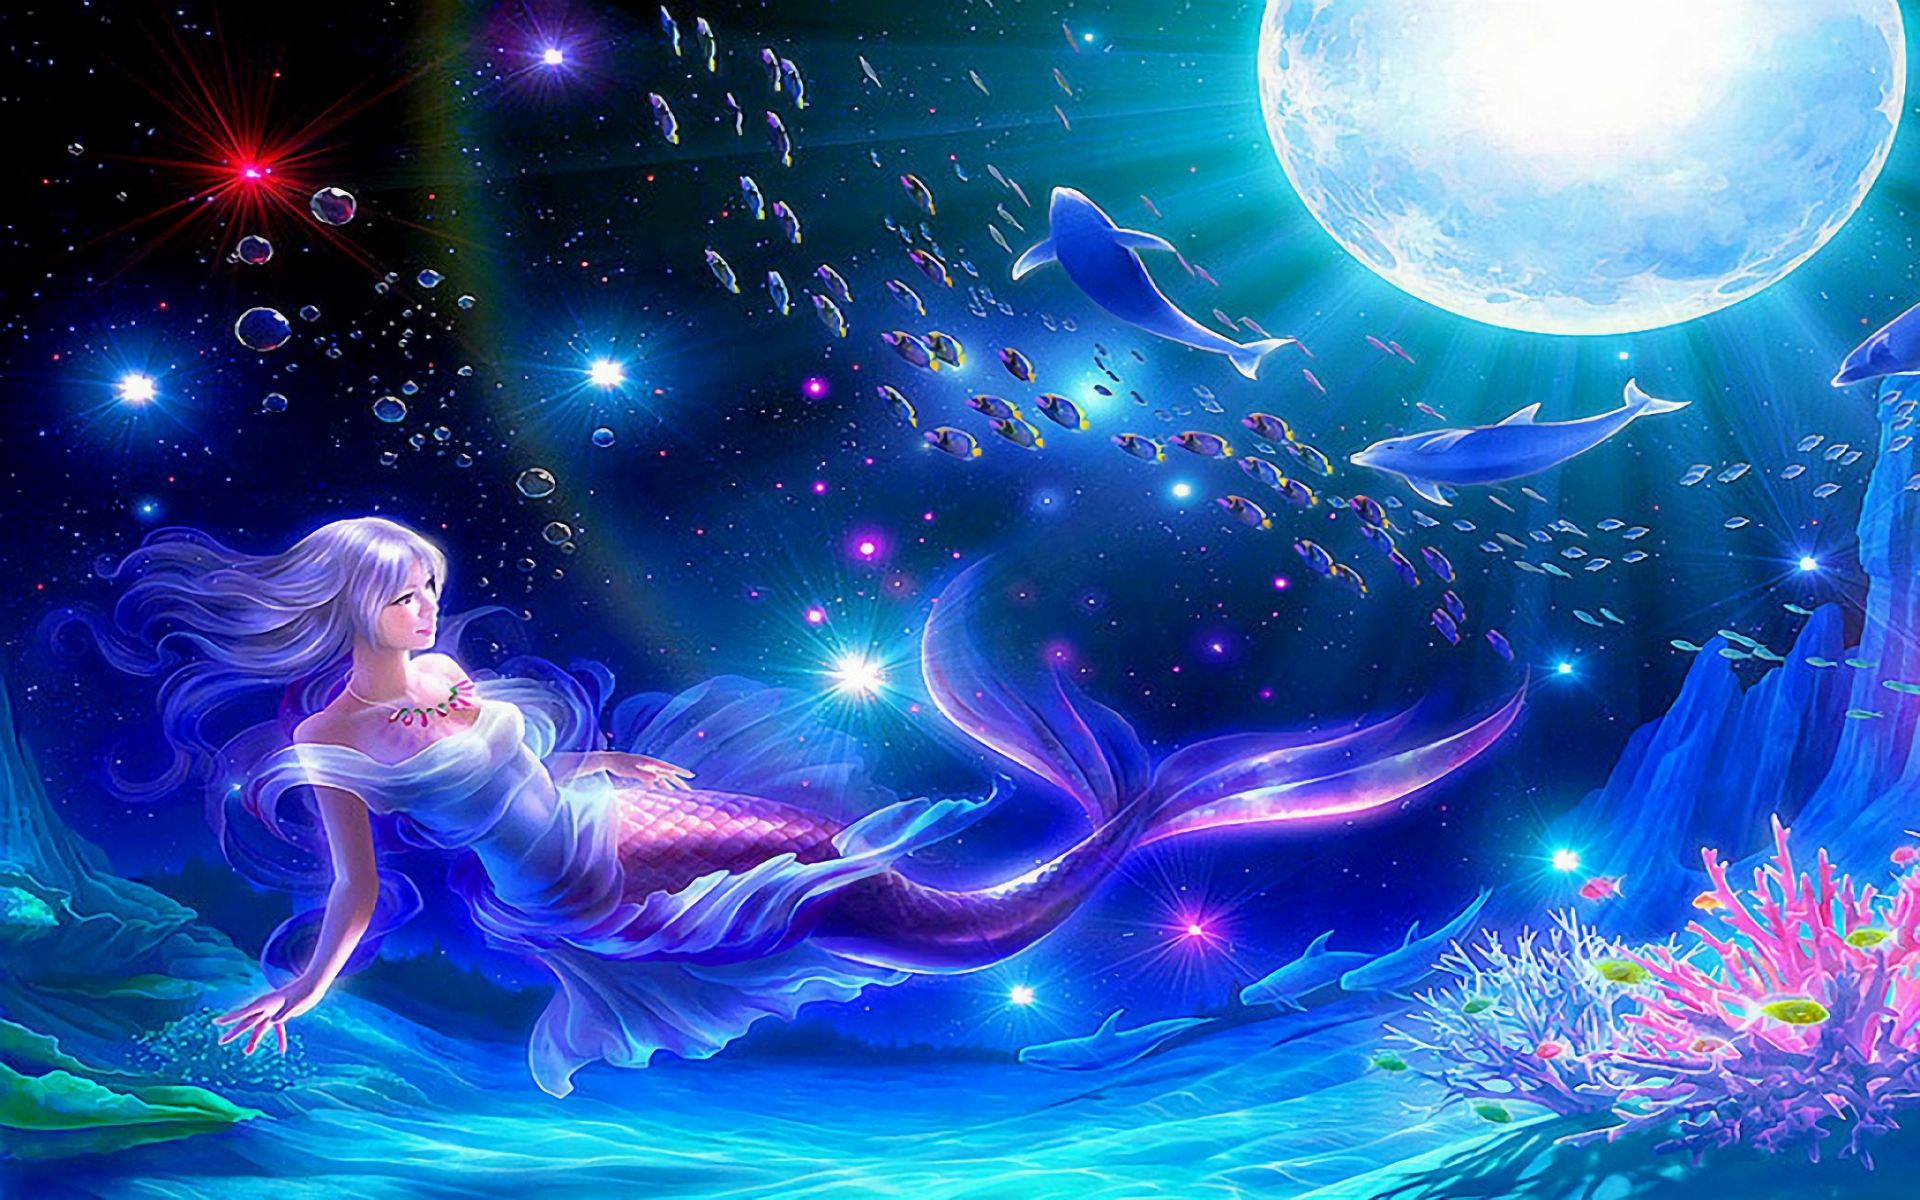 Fantasy mermaid swimming underwater with colorful fish, moon, and a playful dolphin.